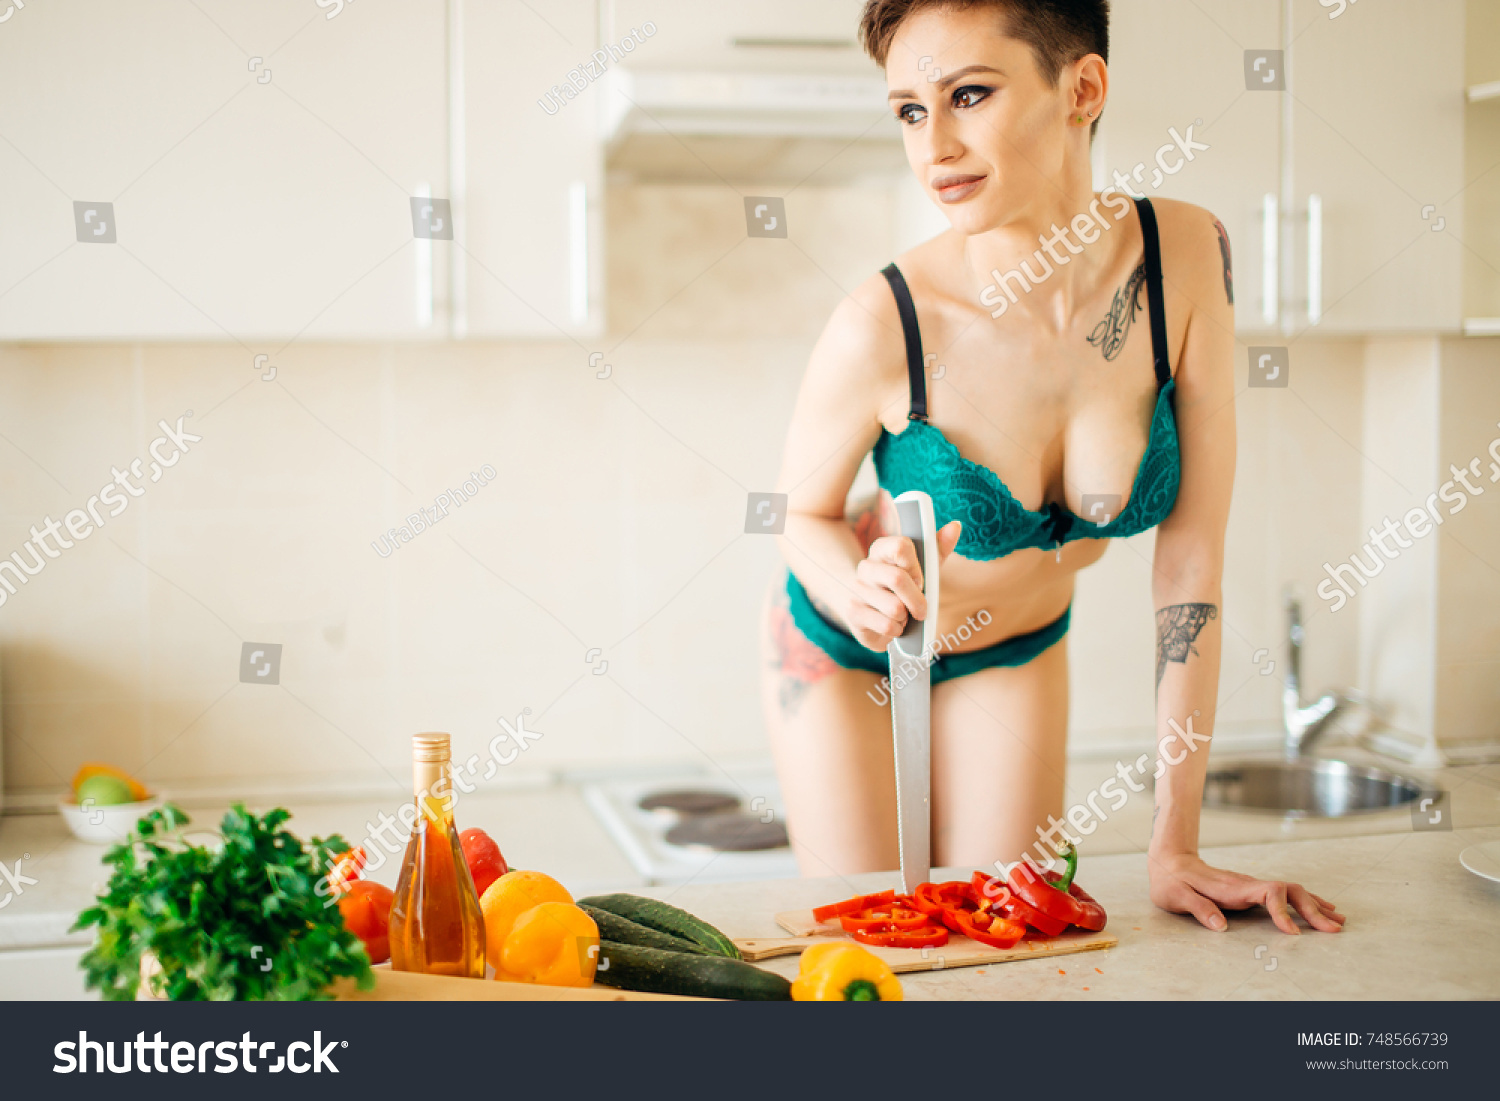 Hot And Sexy Housewives